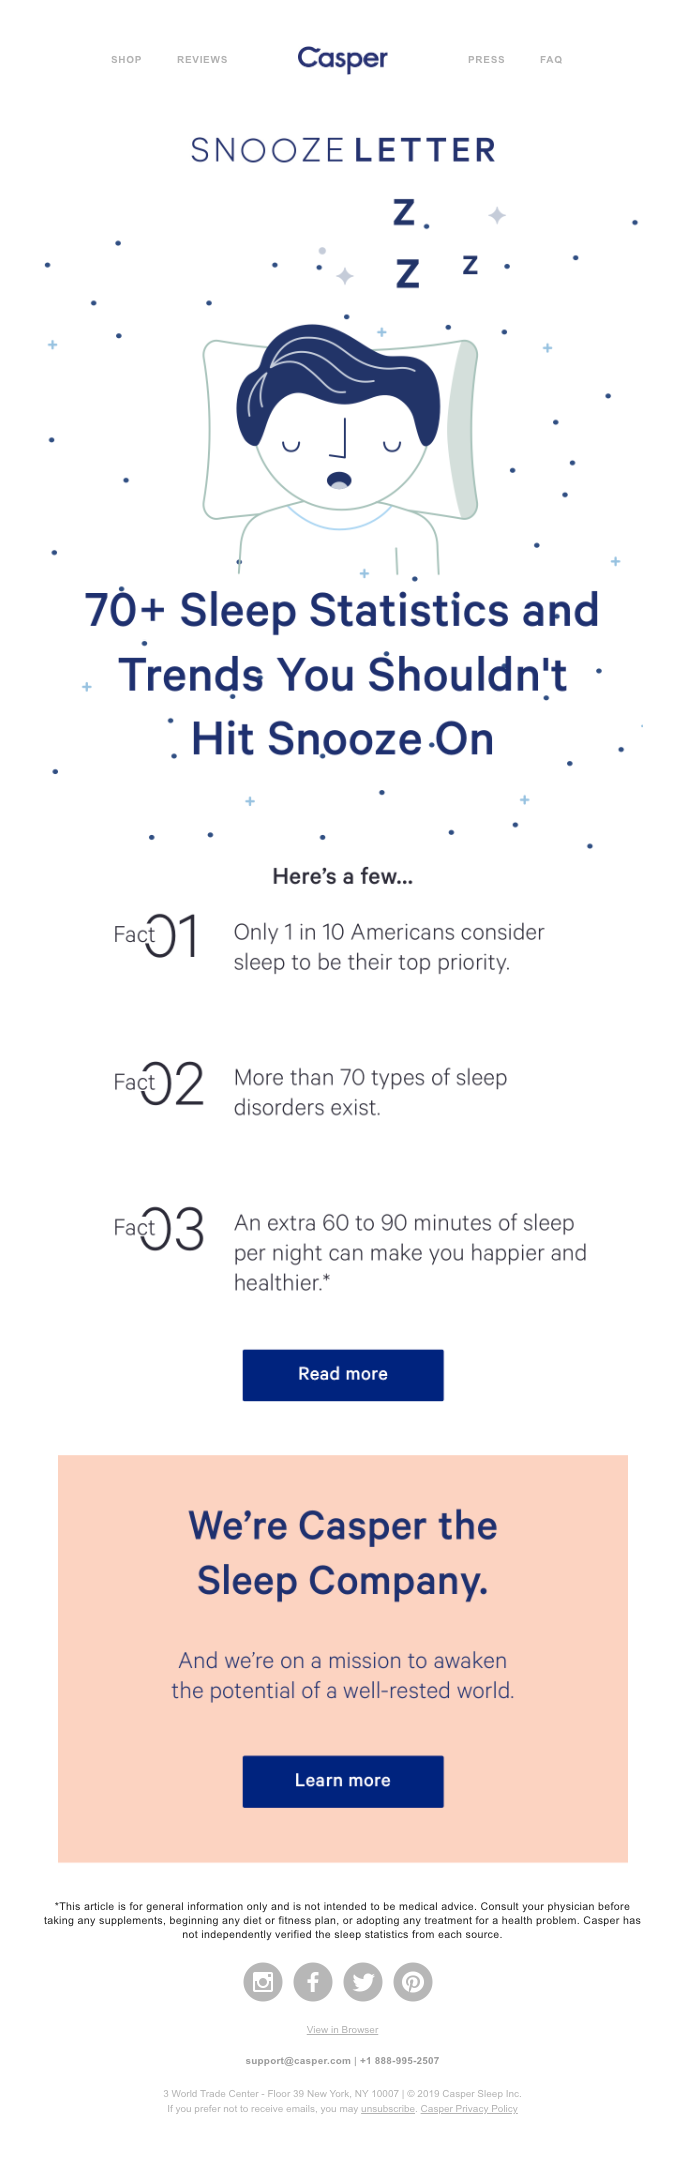 How much do you know about sleep?